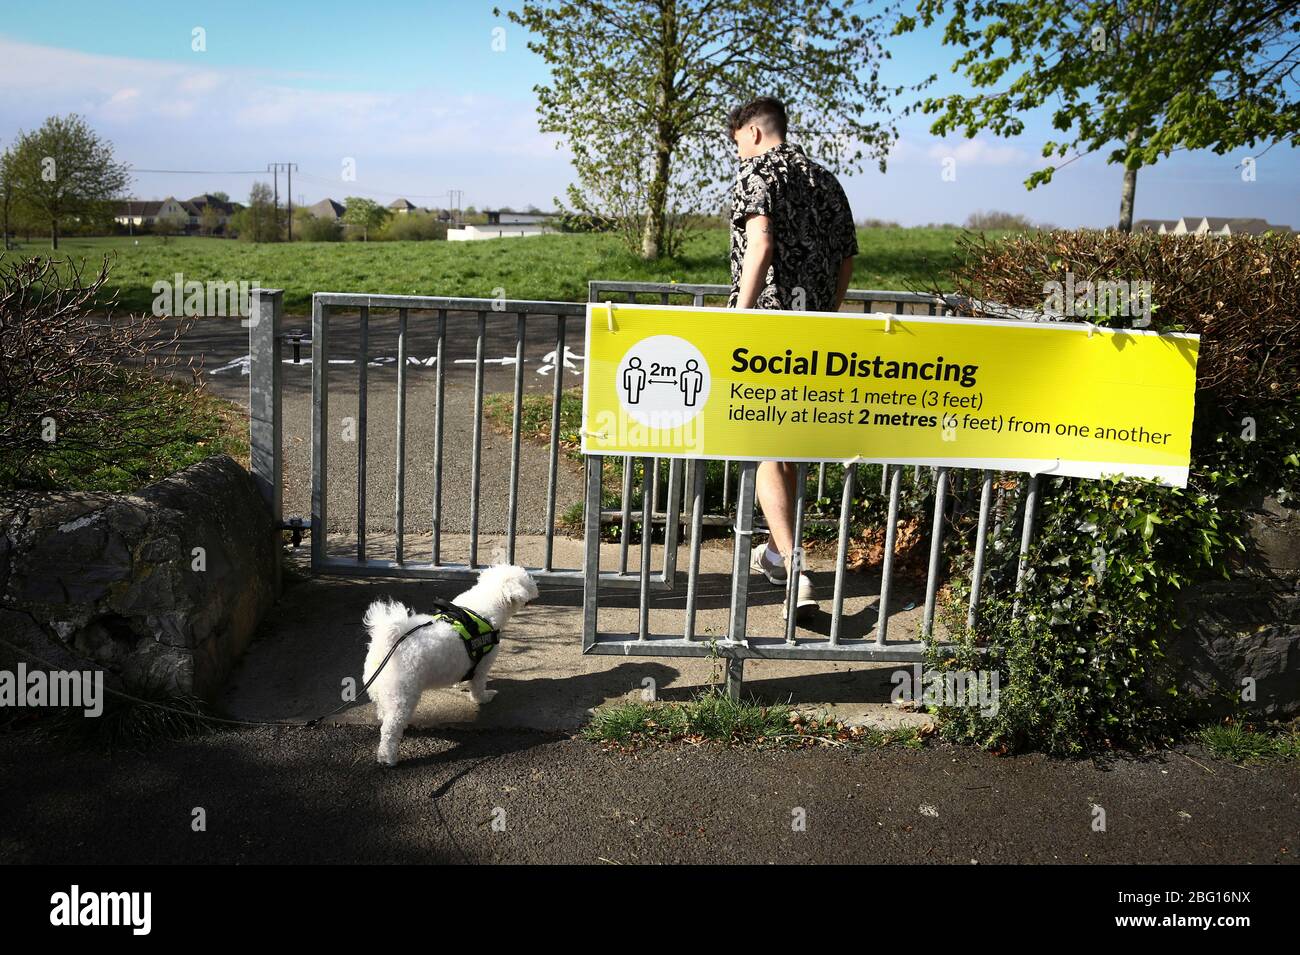 Dublin, Ireland - April 19, 2020: a jogger passing a two metres social distancing public health notice in a park in the city centre. Stock Photo